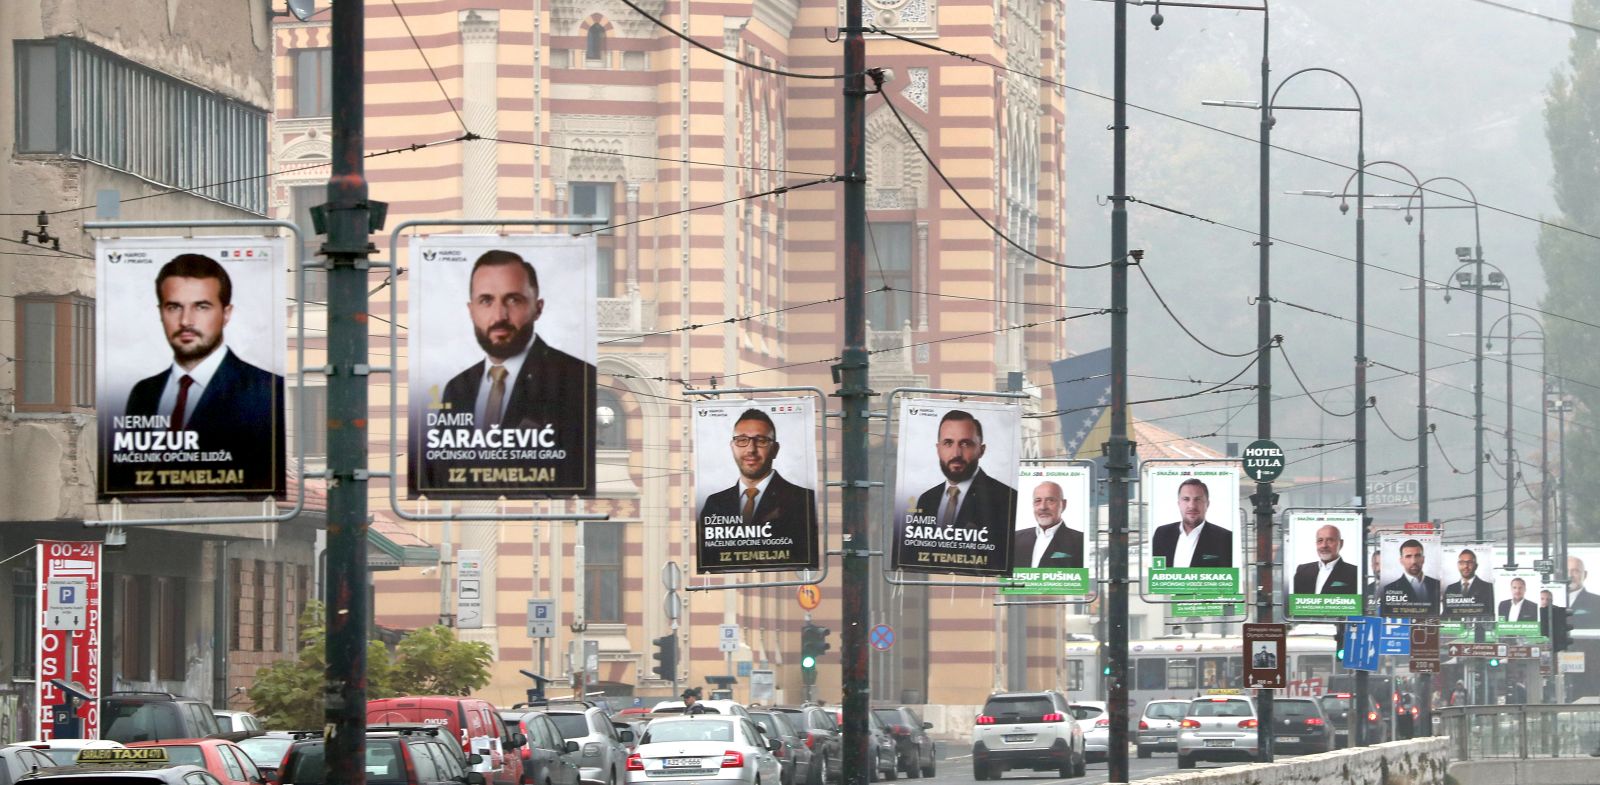 epa08818669 A general view showing various election campaign posters in Sarajevo, Bosnia and Herzegovina, 13 November 2020. More than three million Bosnian citizens are eligible to vote in the country's Local elections on 15 November 2020.  EPA/FEHIM DEMIR